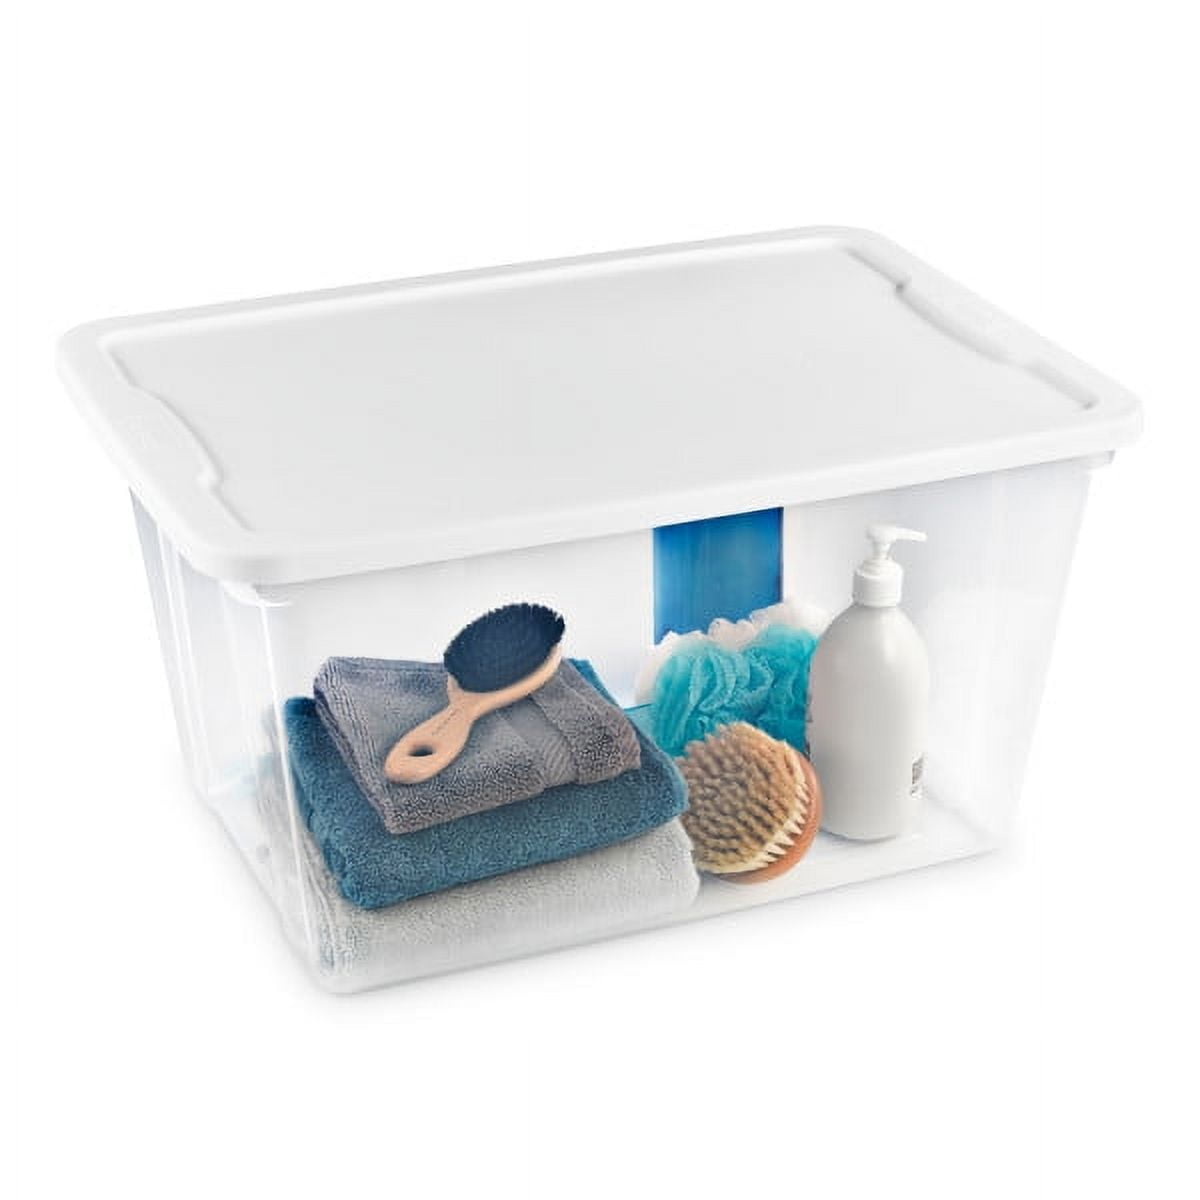 6 Small Boxes with Lids, 3 Quart Plastic Storage Bins from Ortodayes.